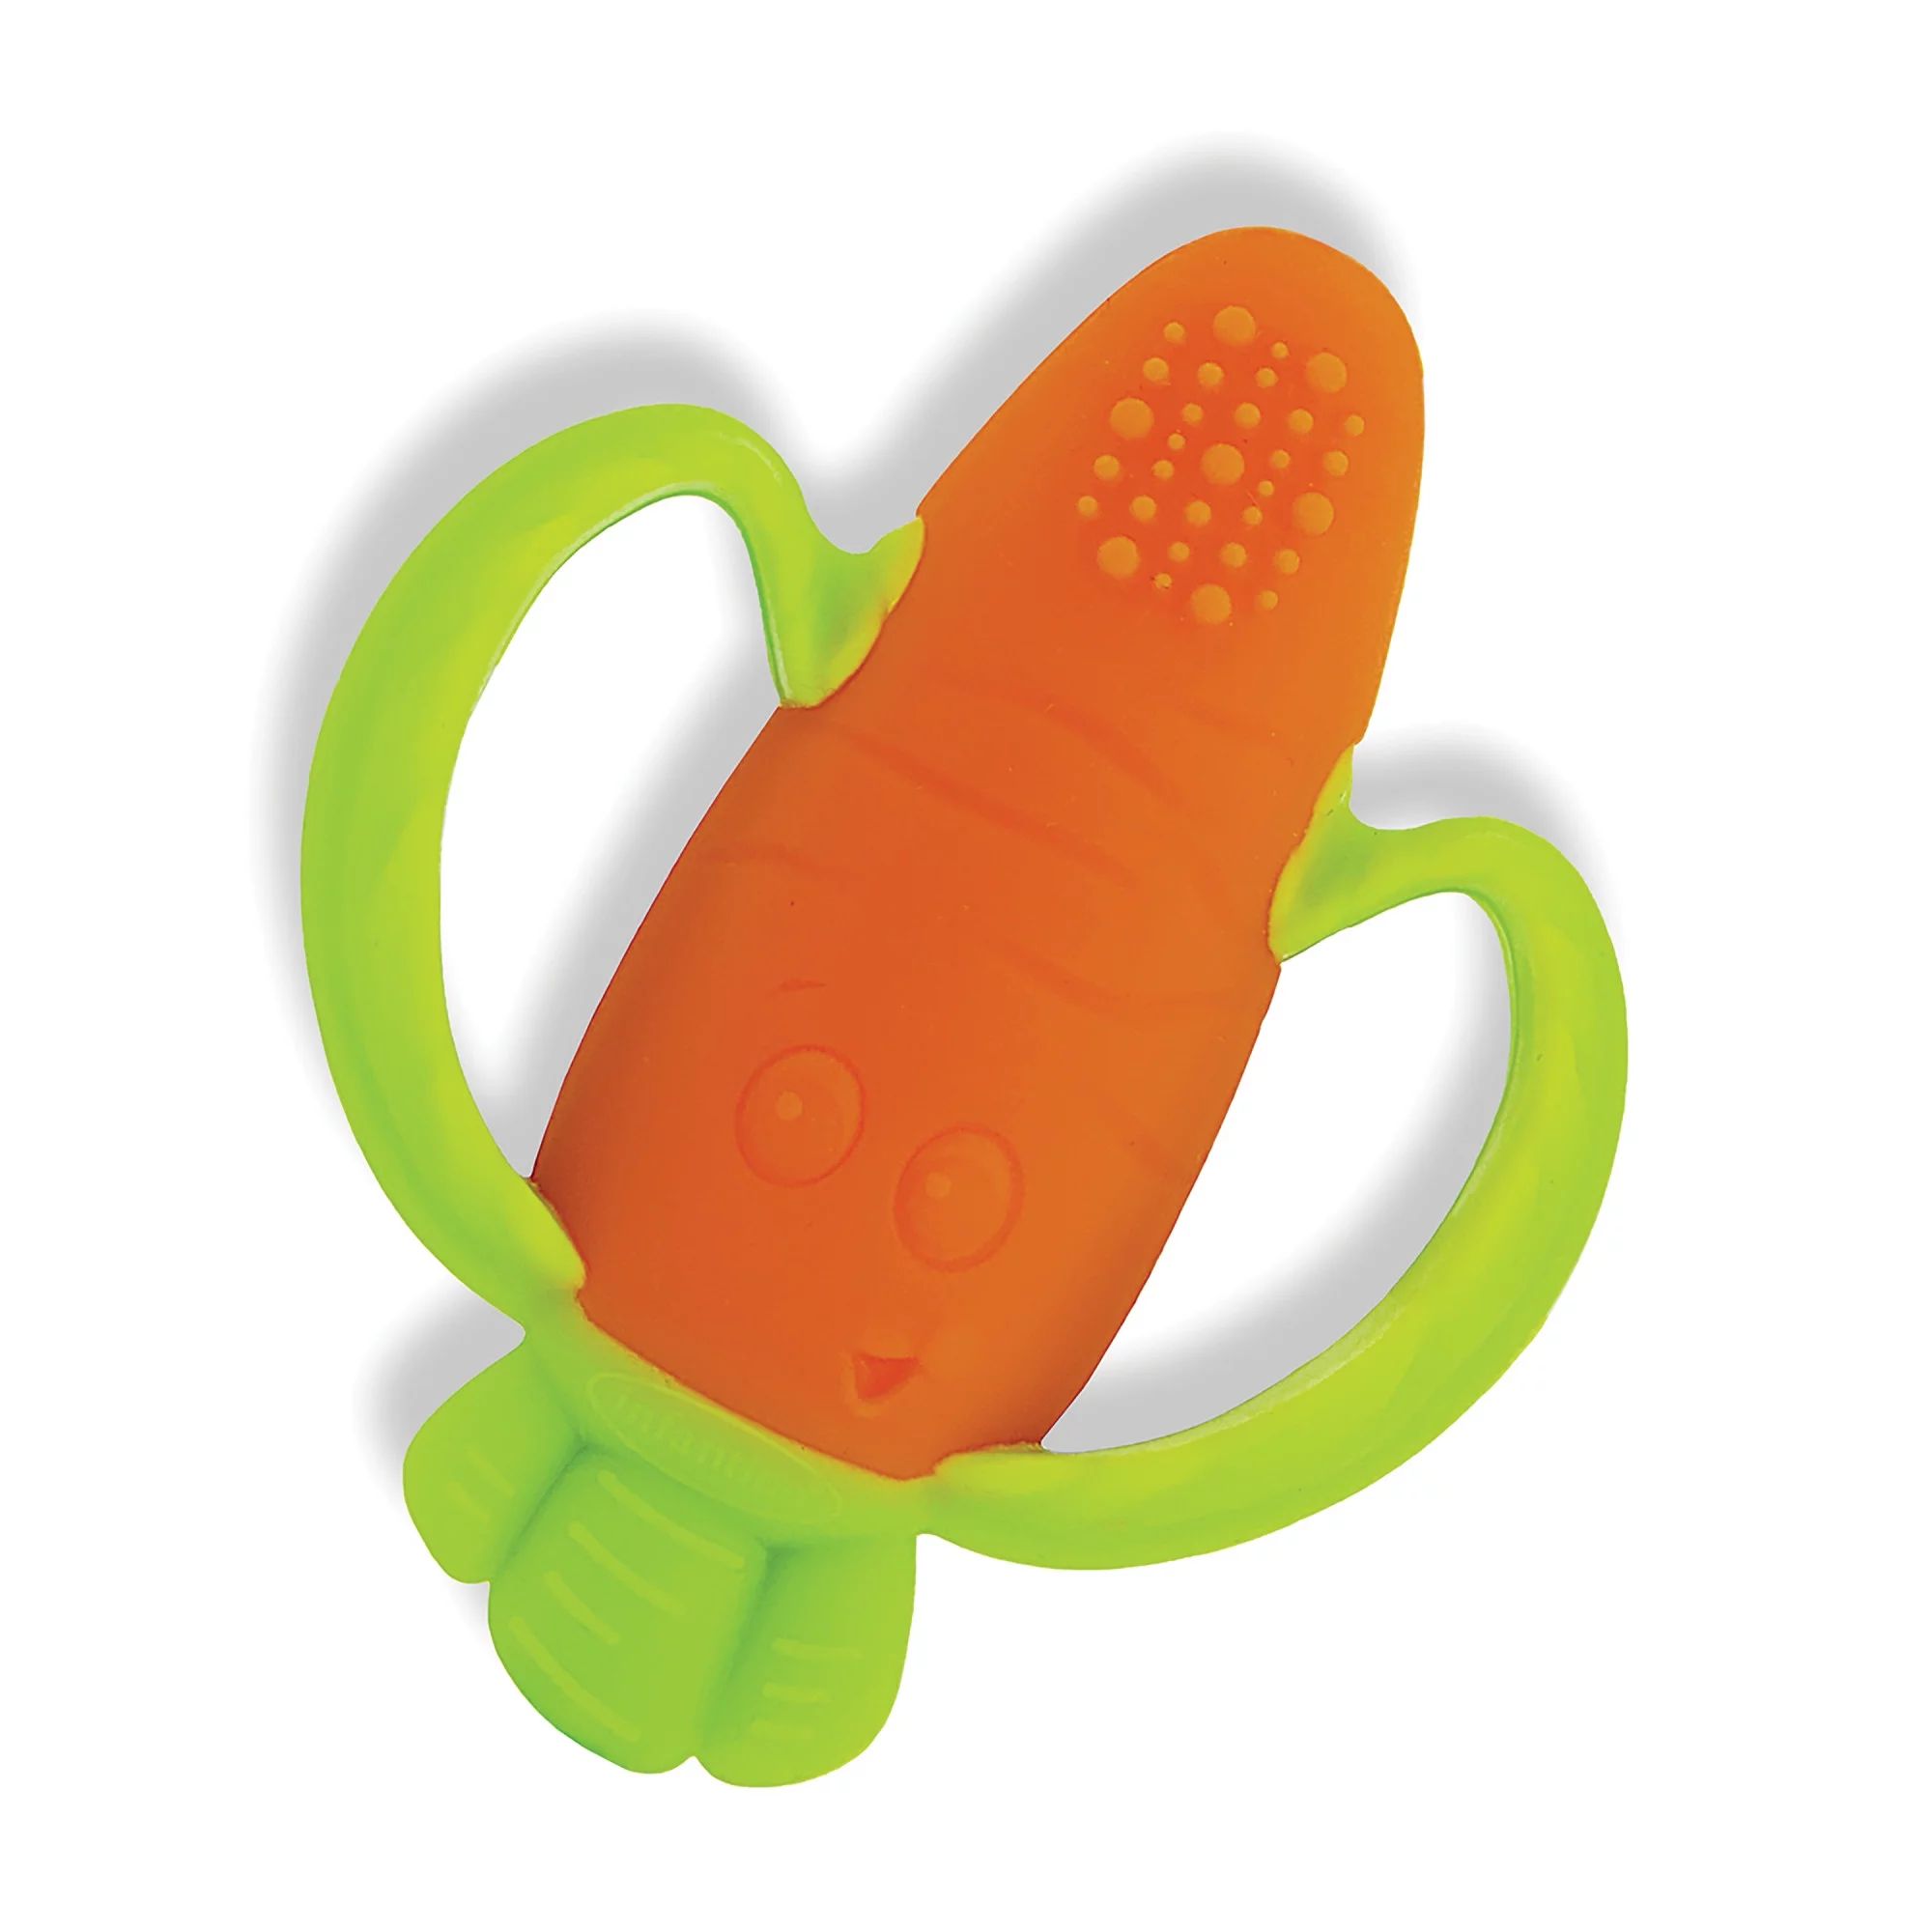 Infantino Lil' Nibbles Textured Baby Teething Toy, Age 6-12 Months Unisex, Orange Carrot | Walmart (US)